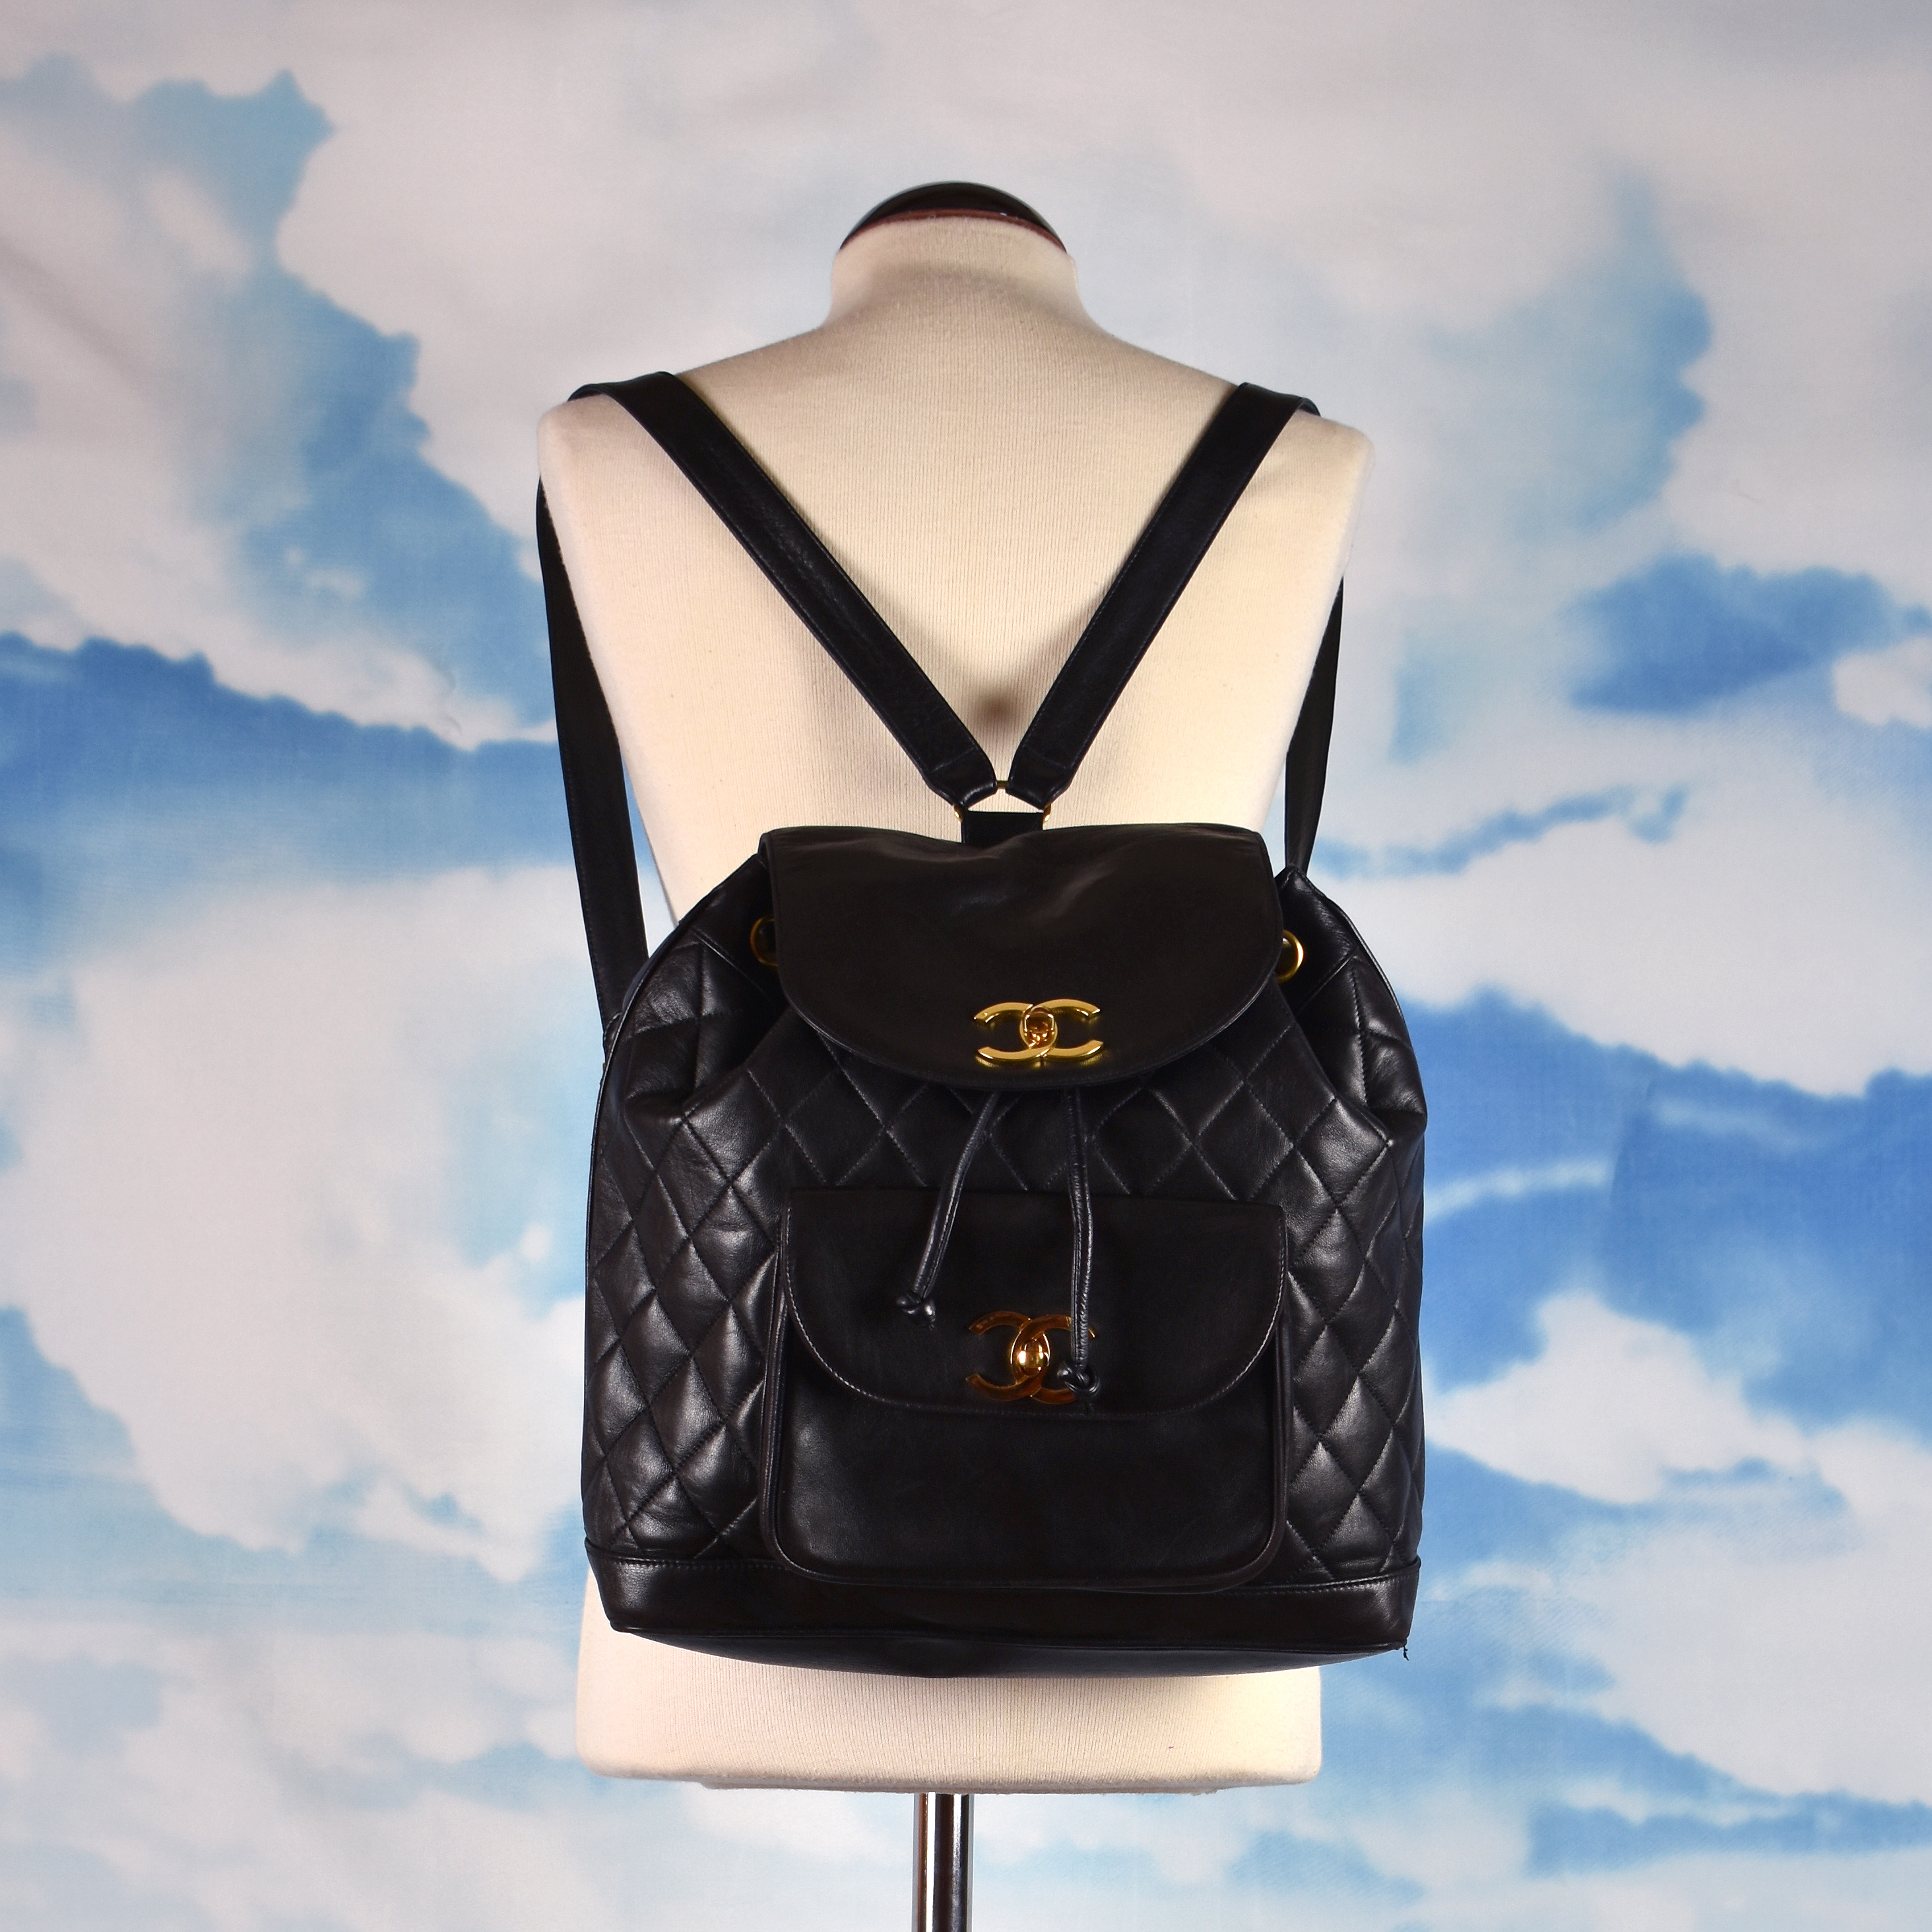 METROCITY QUILTED LEATHER BACKPACK ALA MCM CHANEL, Women's Fashion